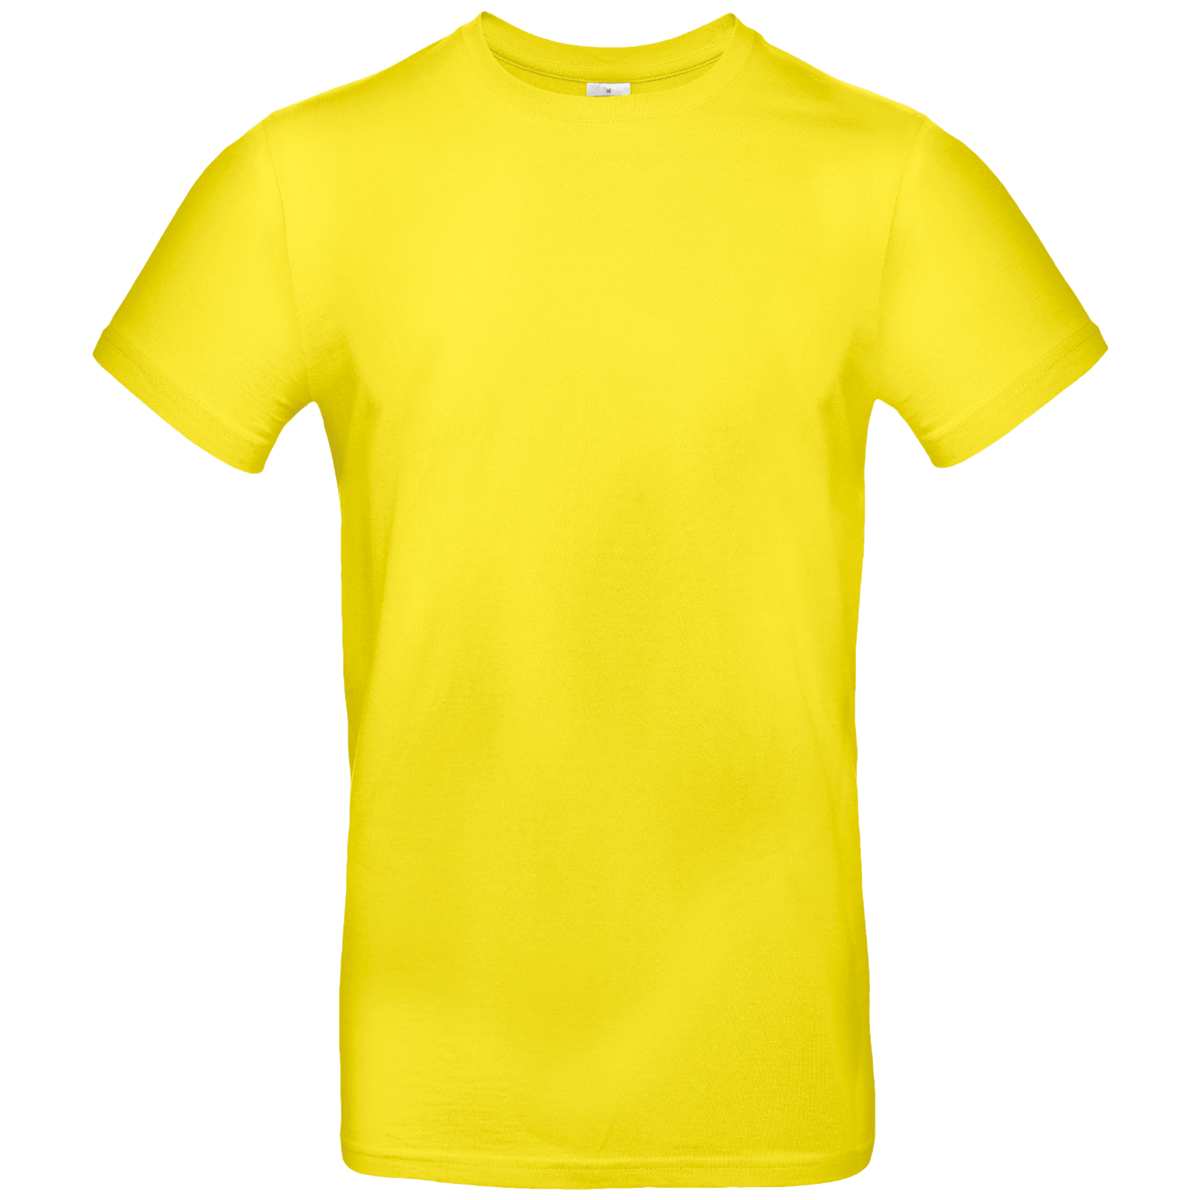 Tee-Shirt Homme Personnalisable Sur Tunetoo Solar Yellow